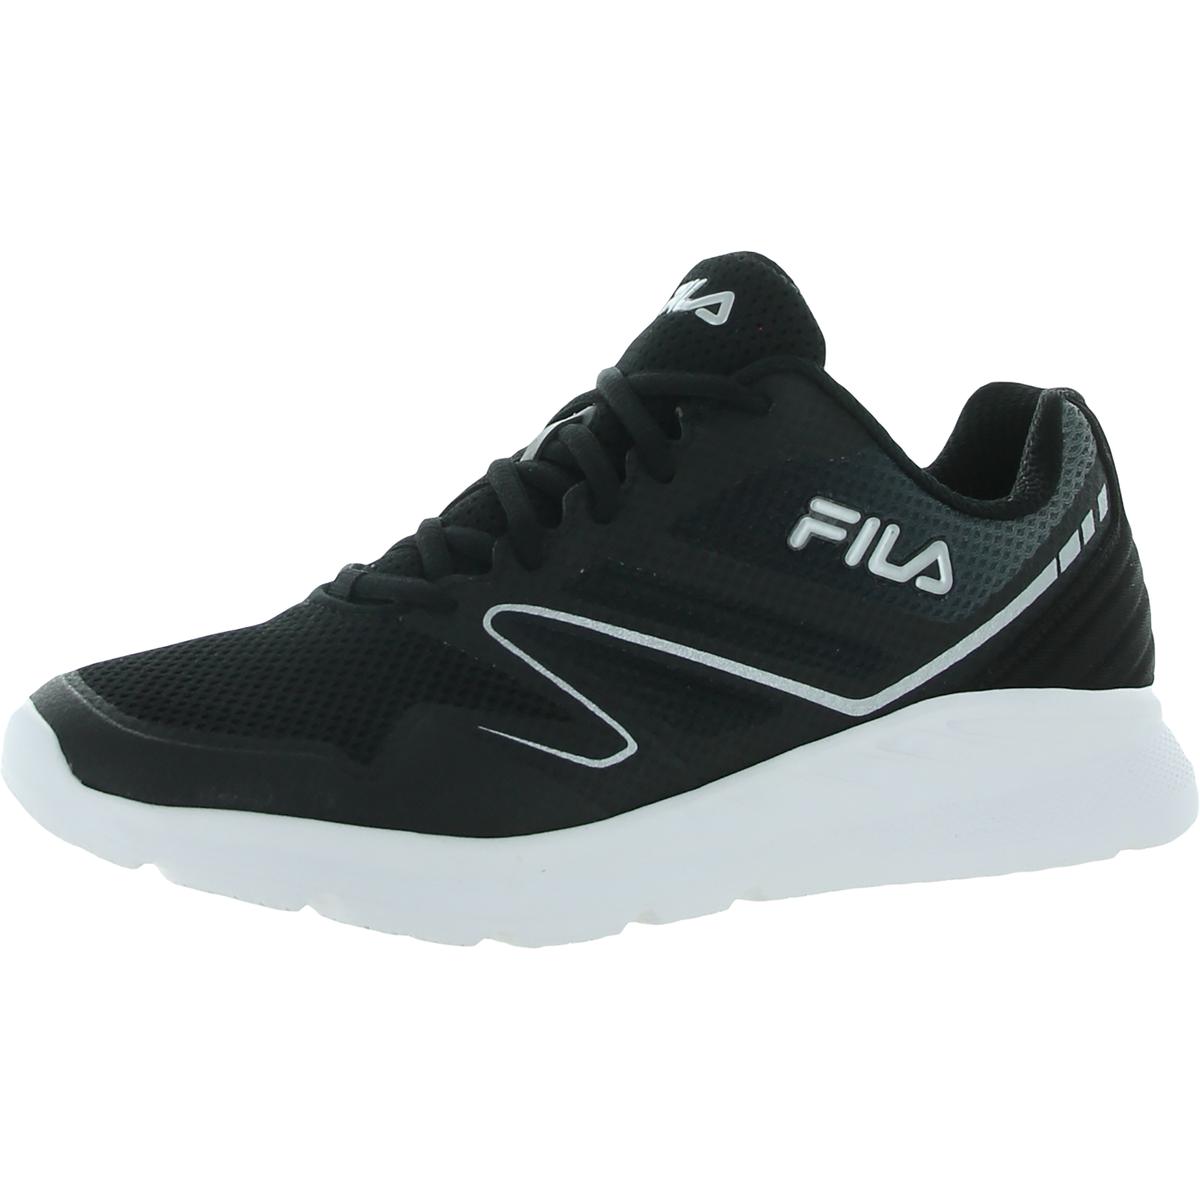 Fila Mens Memory Panorama 8 Sneakers Trainers Running Shoes Athletic BHFO  7703 | eBay